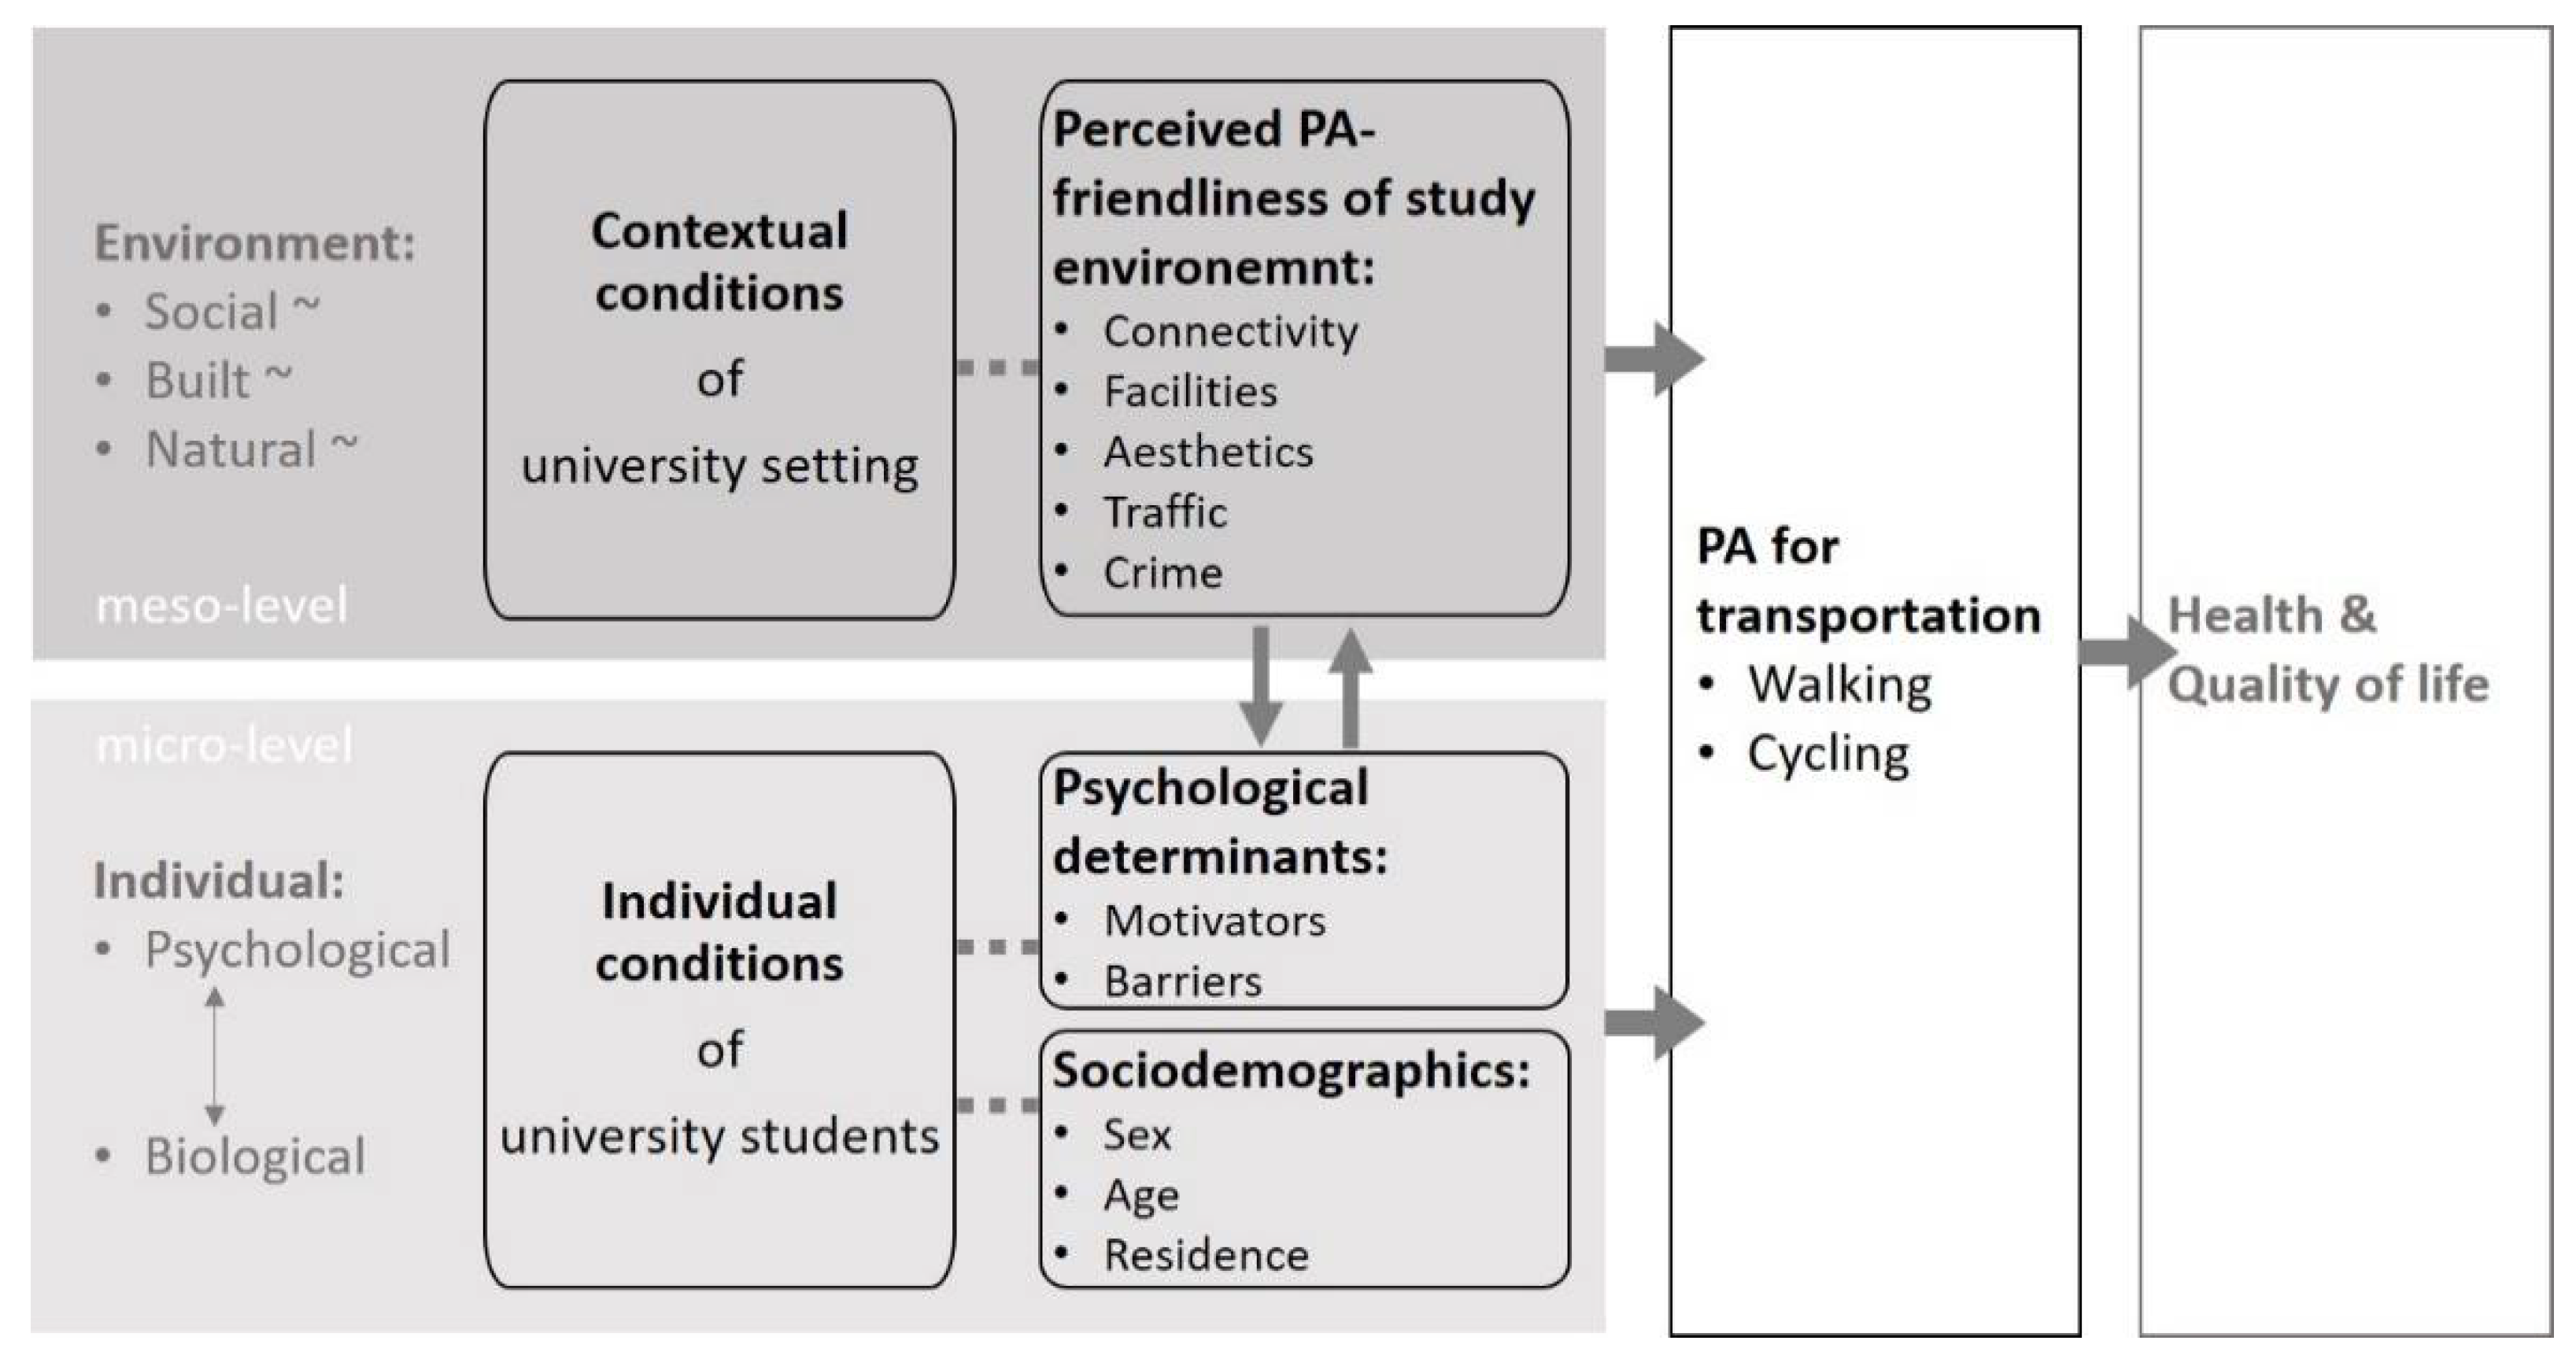 IJERPH | Free Full-Text | Why Do Students Walk or Cycle for Transportation?  Perceived Study Environment and Psychological Determinants as Predictors of  Active Transportation by University Students | HTML